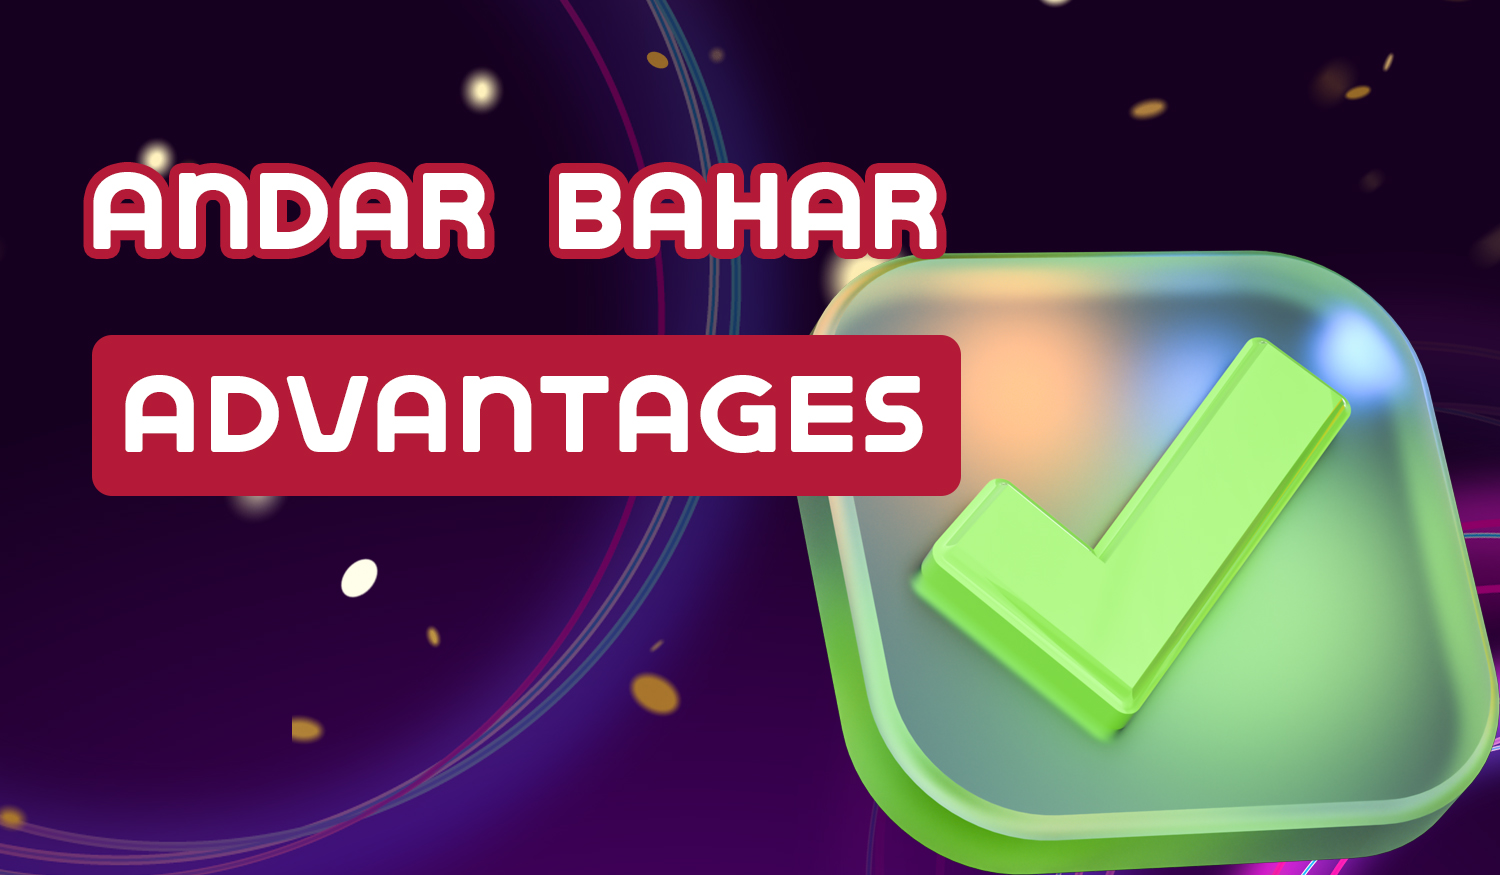 The main advantages of the table game Andar Bahar online